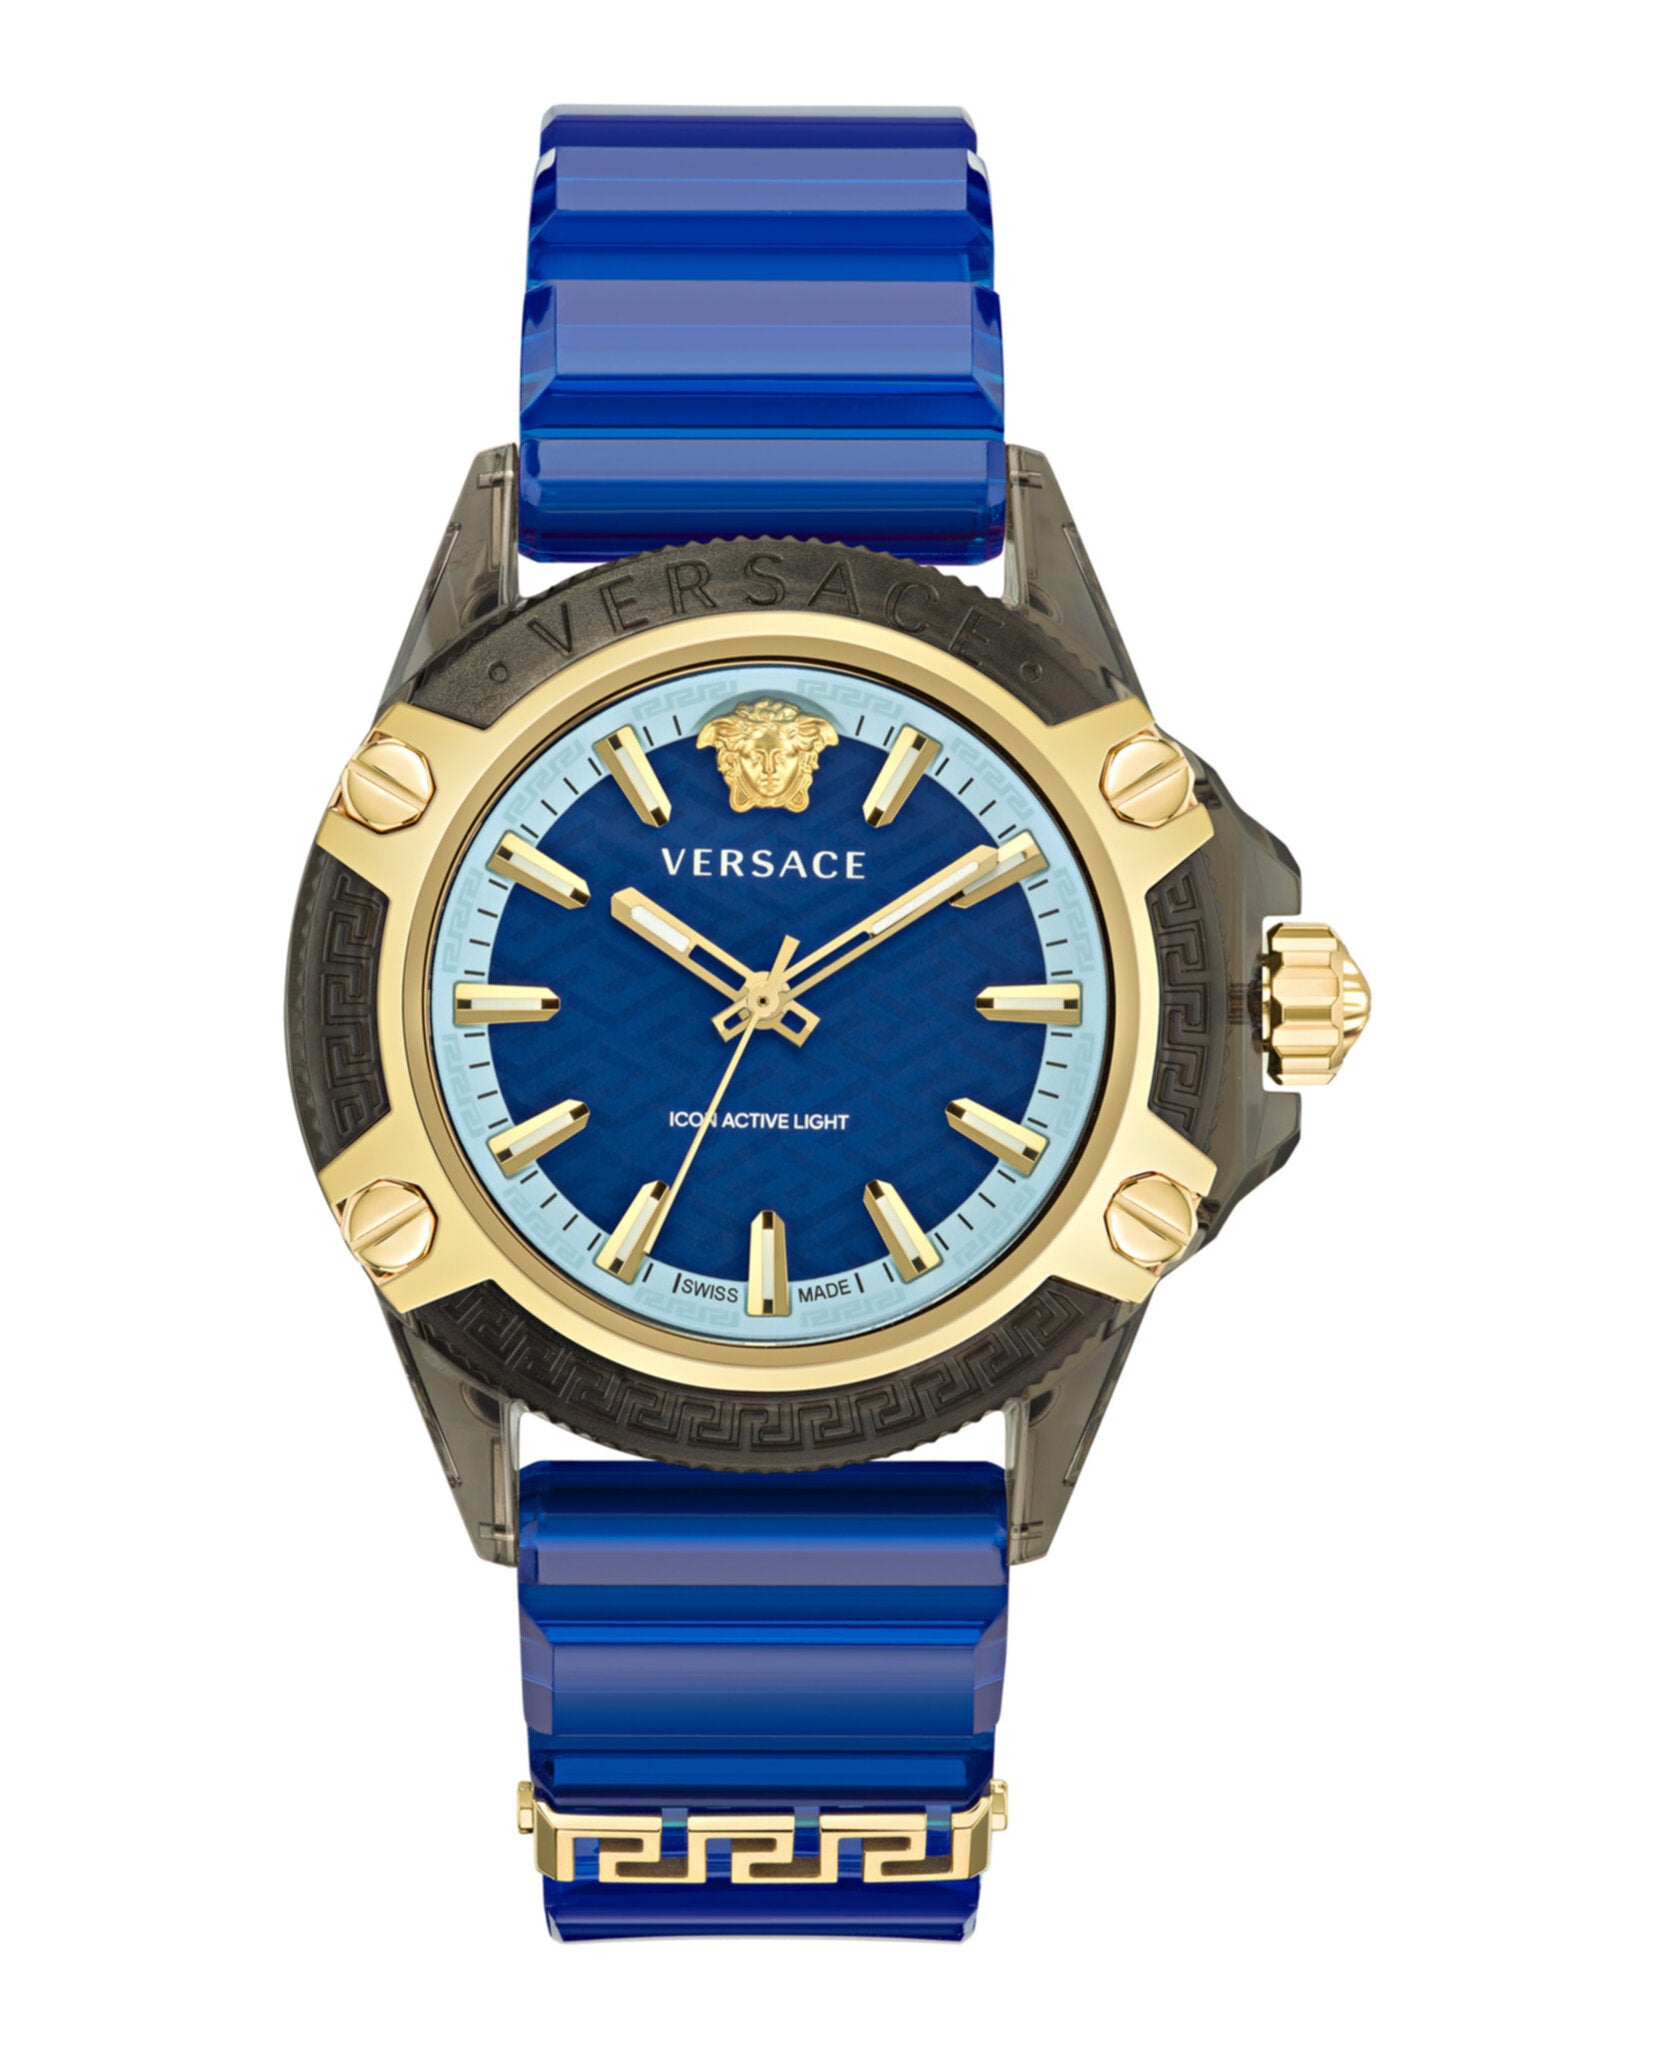 Versace Mens Icon Active Time | – Watches Time Madaluxe MadaLuxe